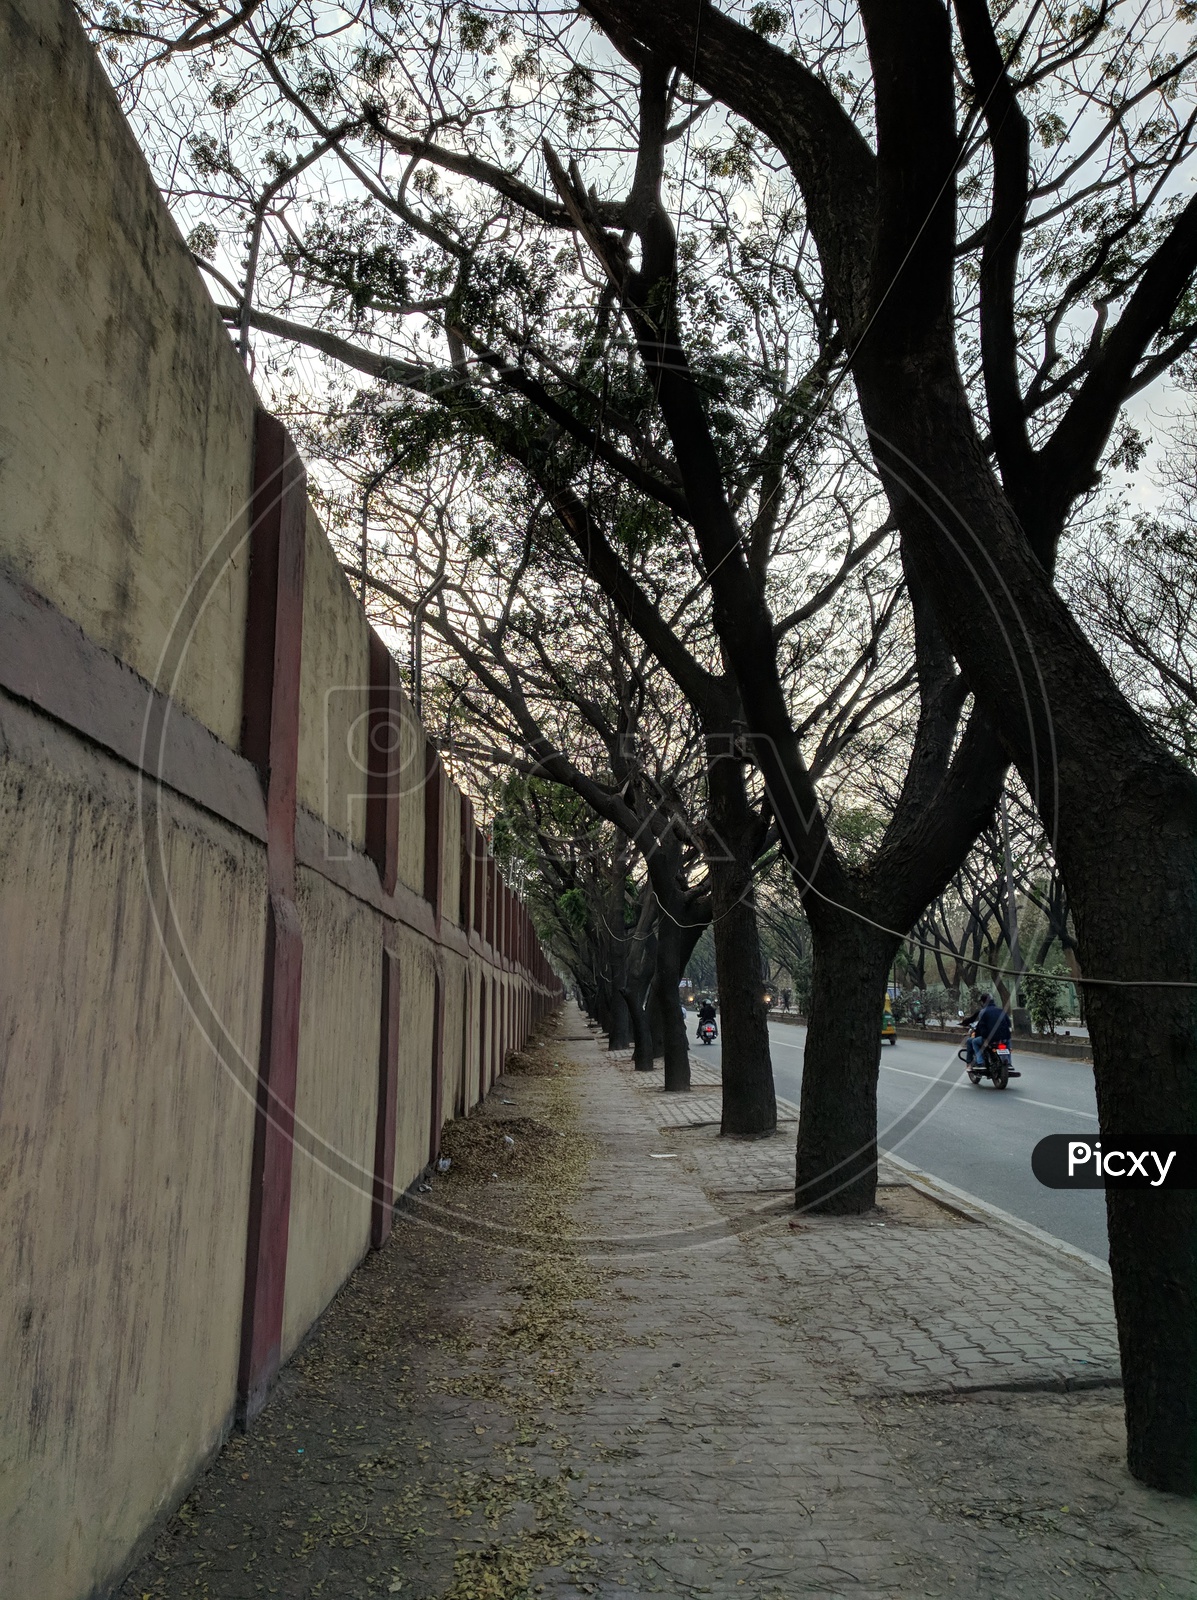 A Footpath With a Trees Along Side Of a Wall